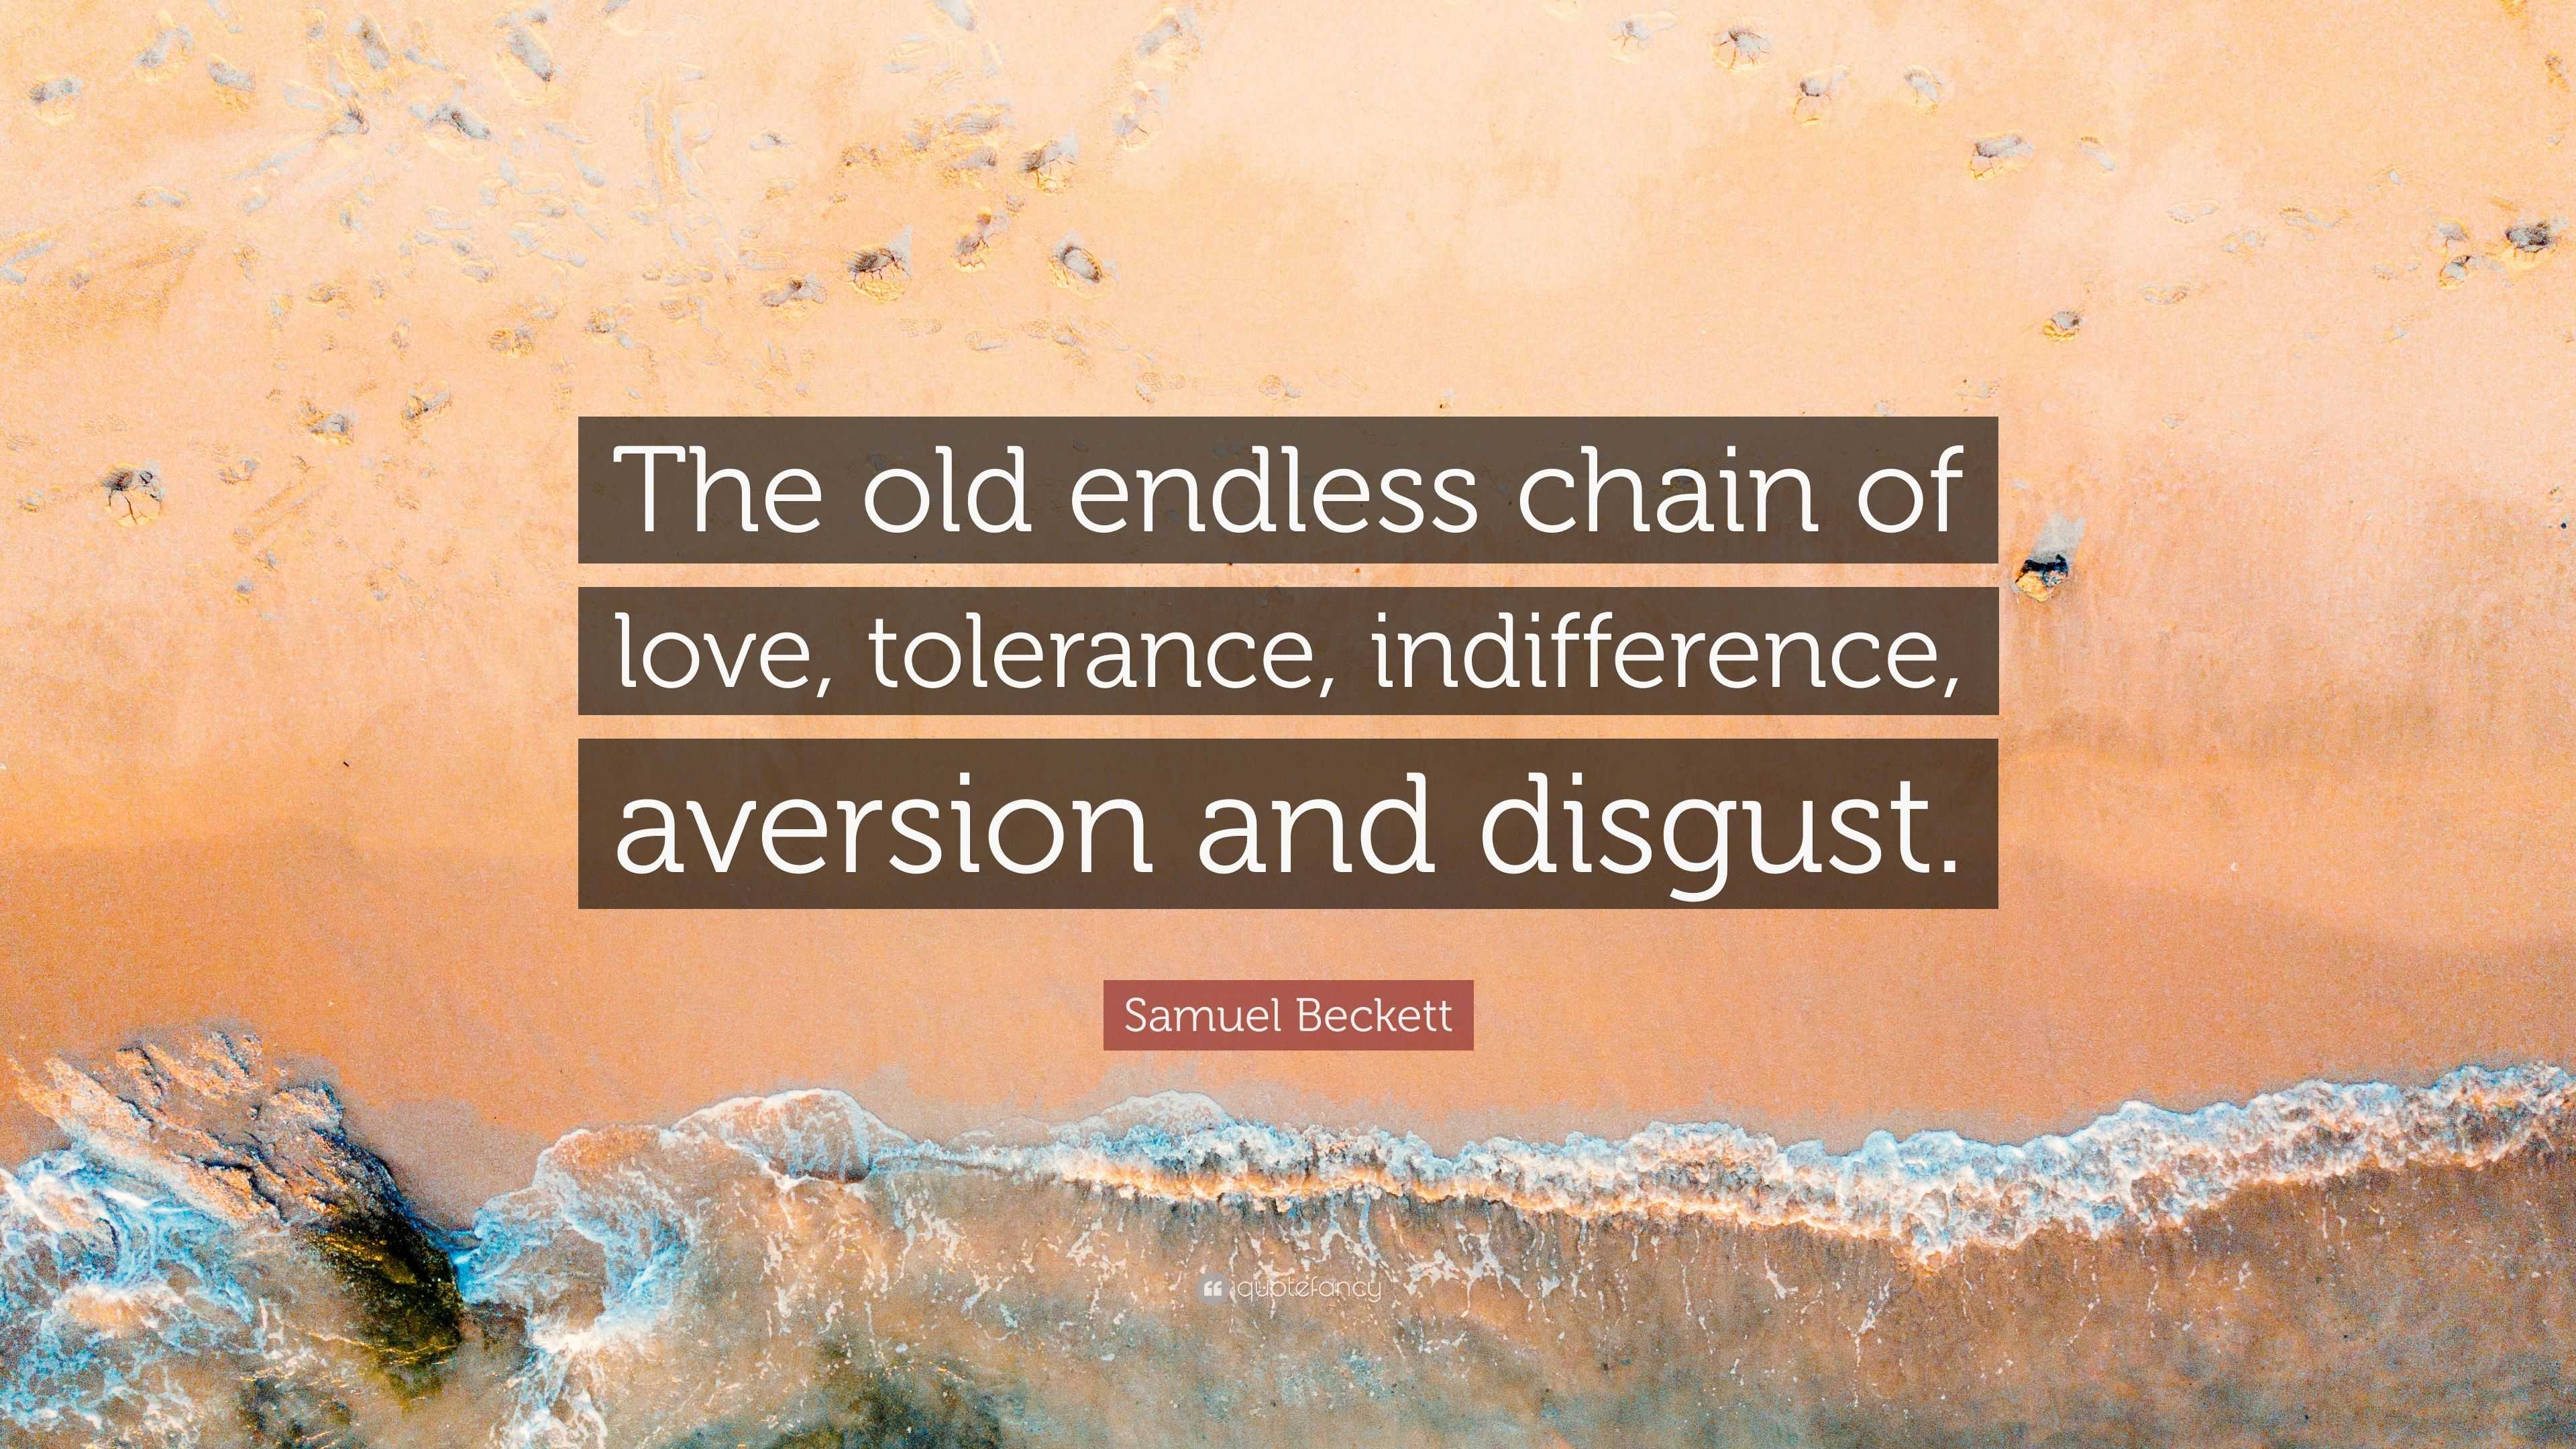 Samuel Beckett Quote: "The old endless chain of love ...